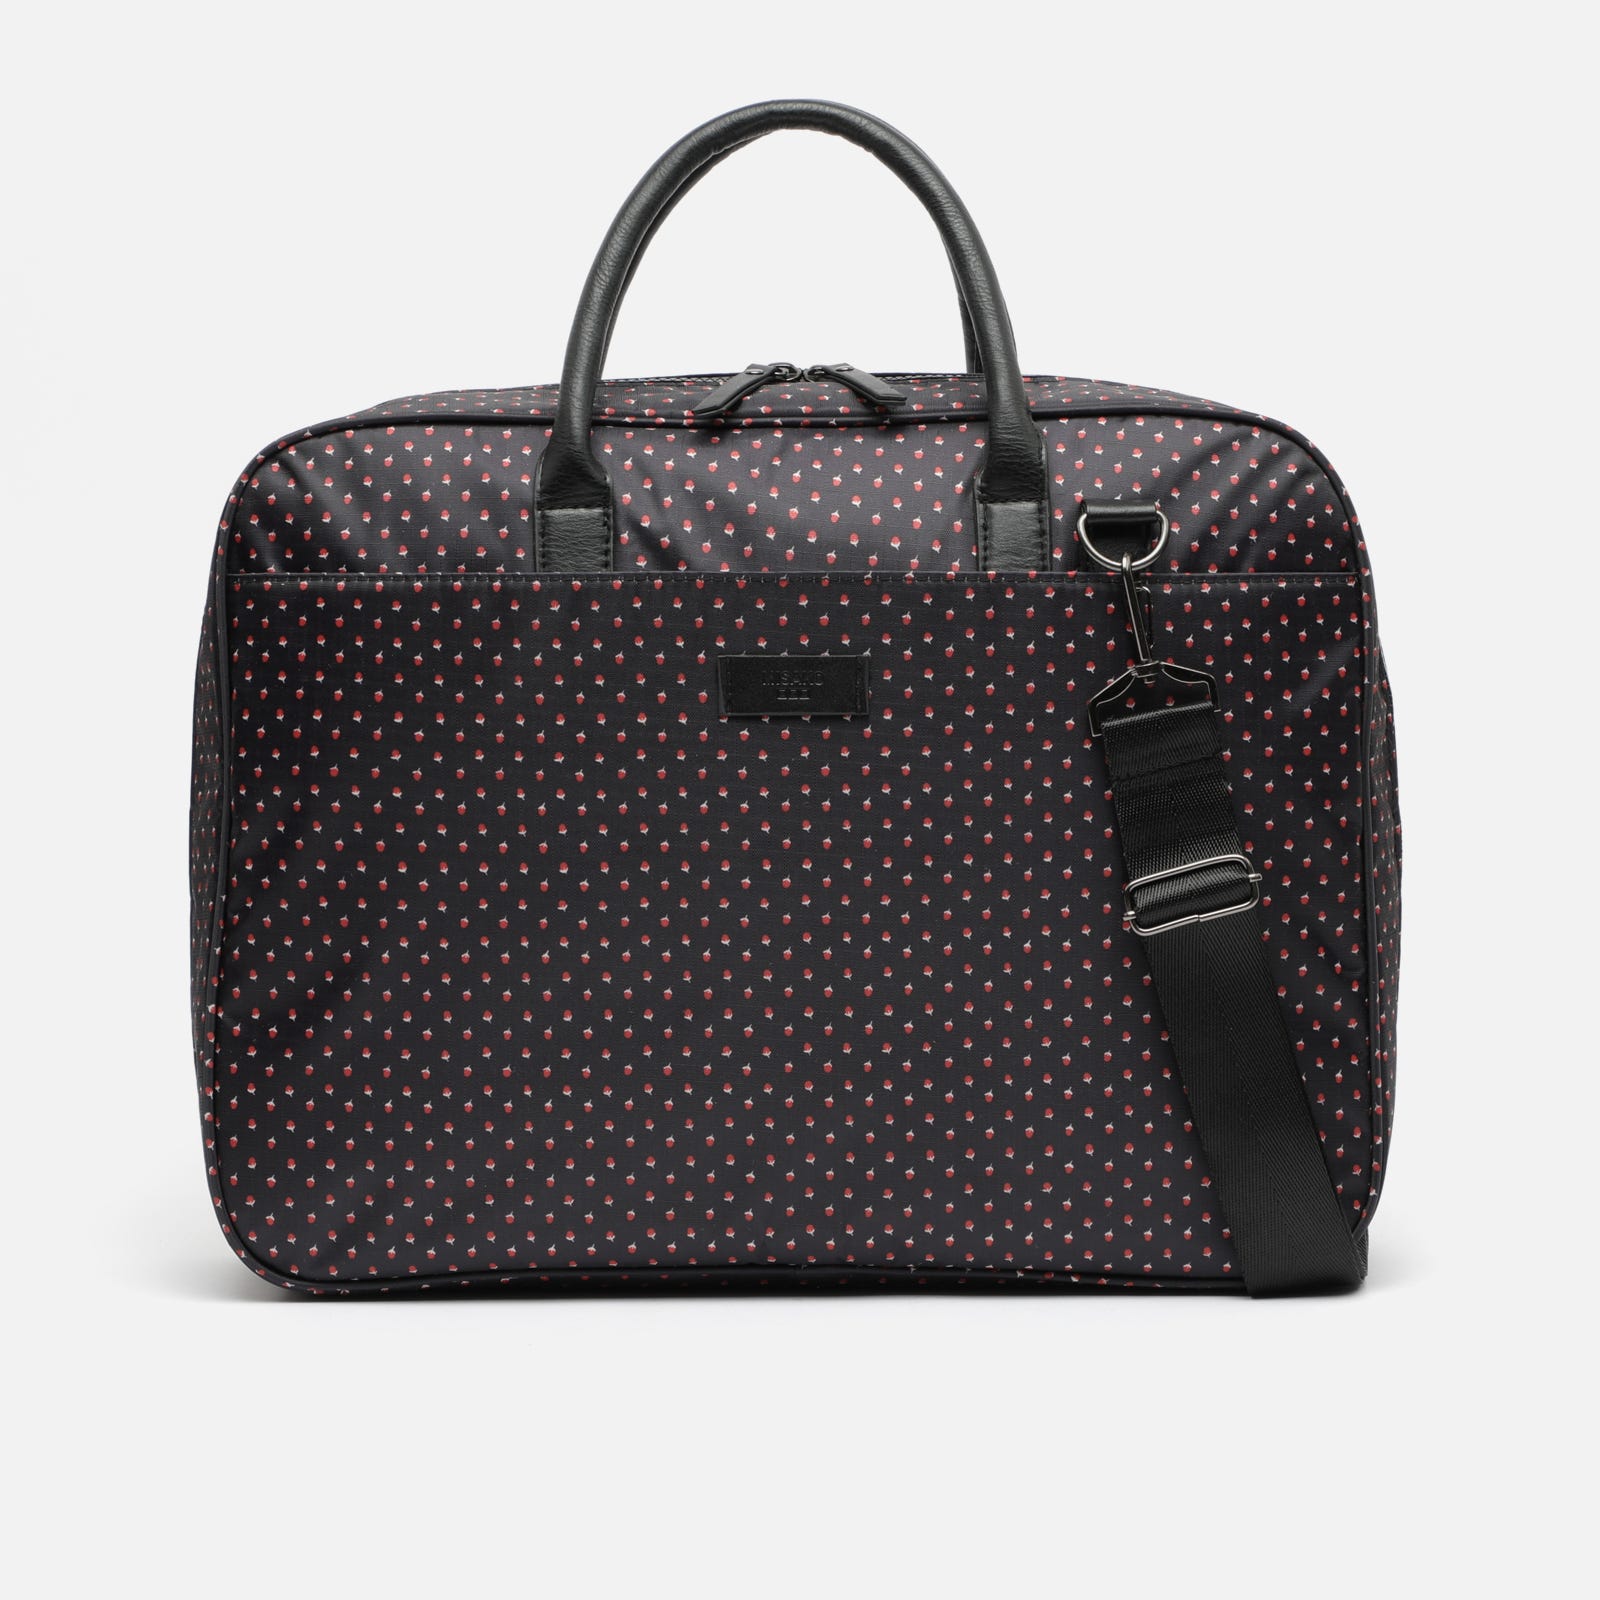 Laptop bag (15.6 inches)